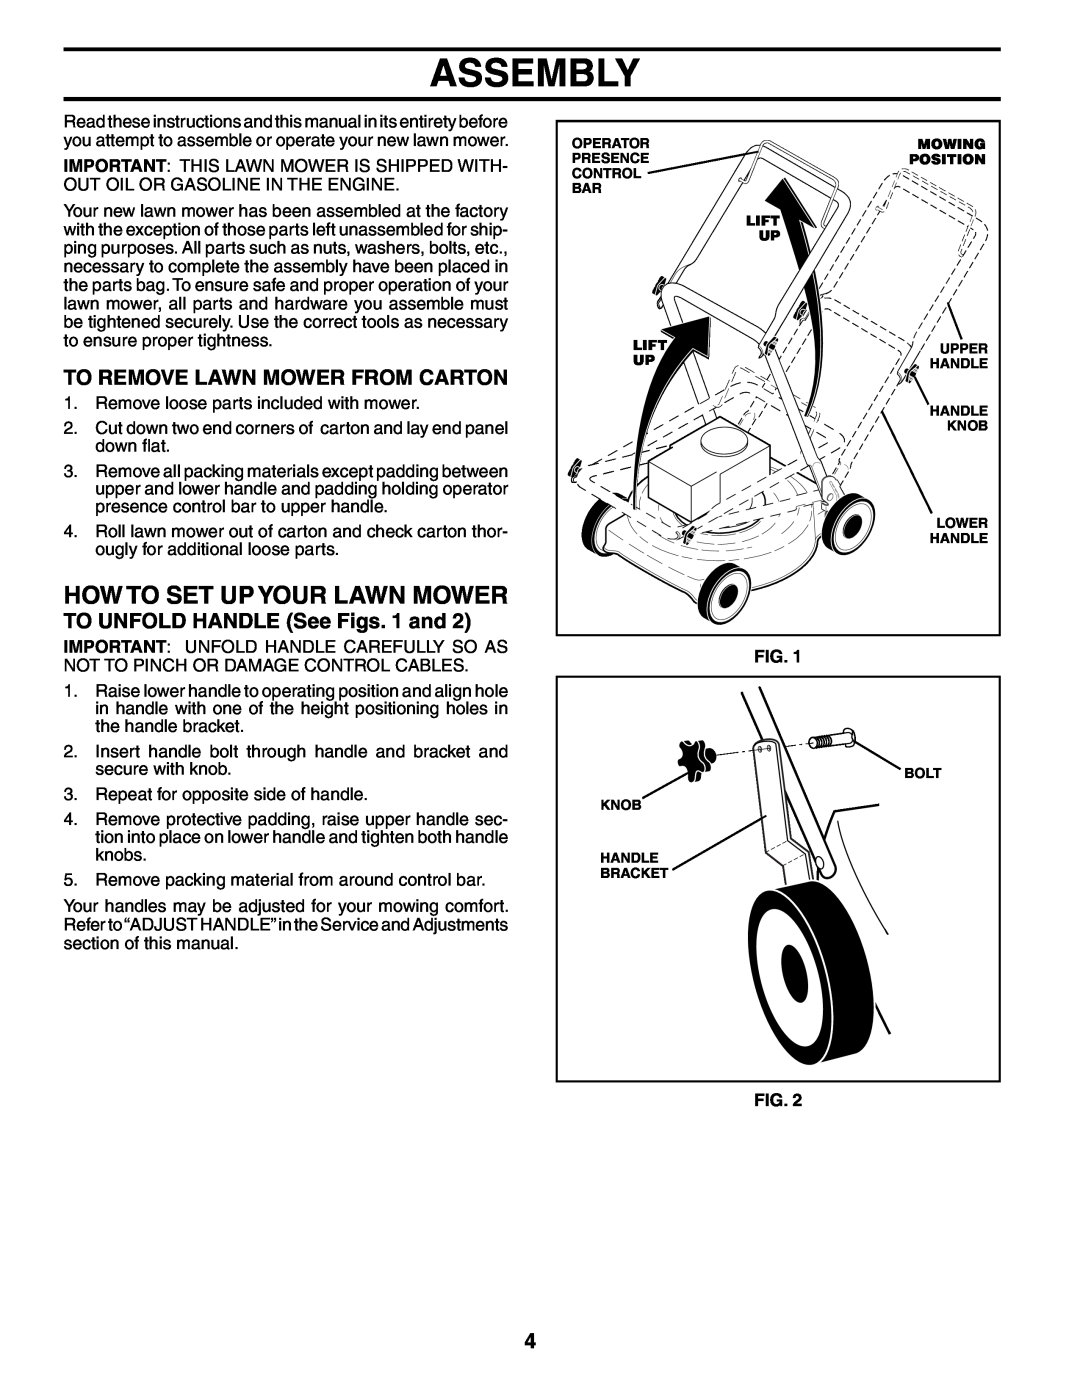 Husqvarna 917.37595 owner manual Assembly, How To Set Up Your Lawn Mower, To Remove Lawn Mower From Carton 